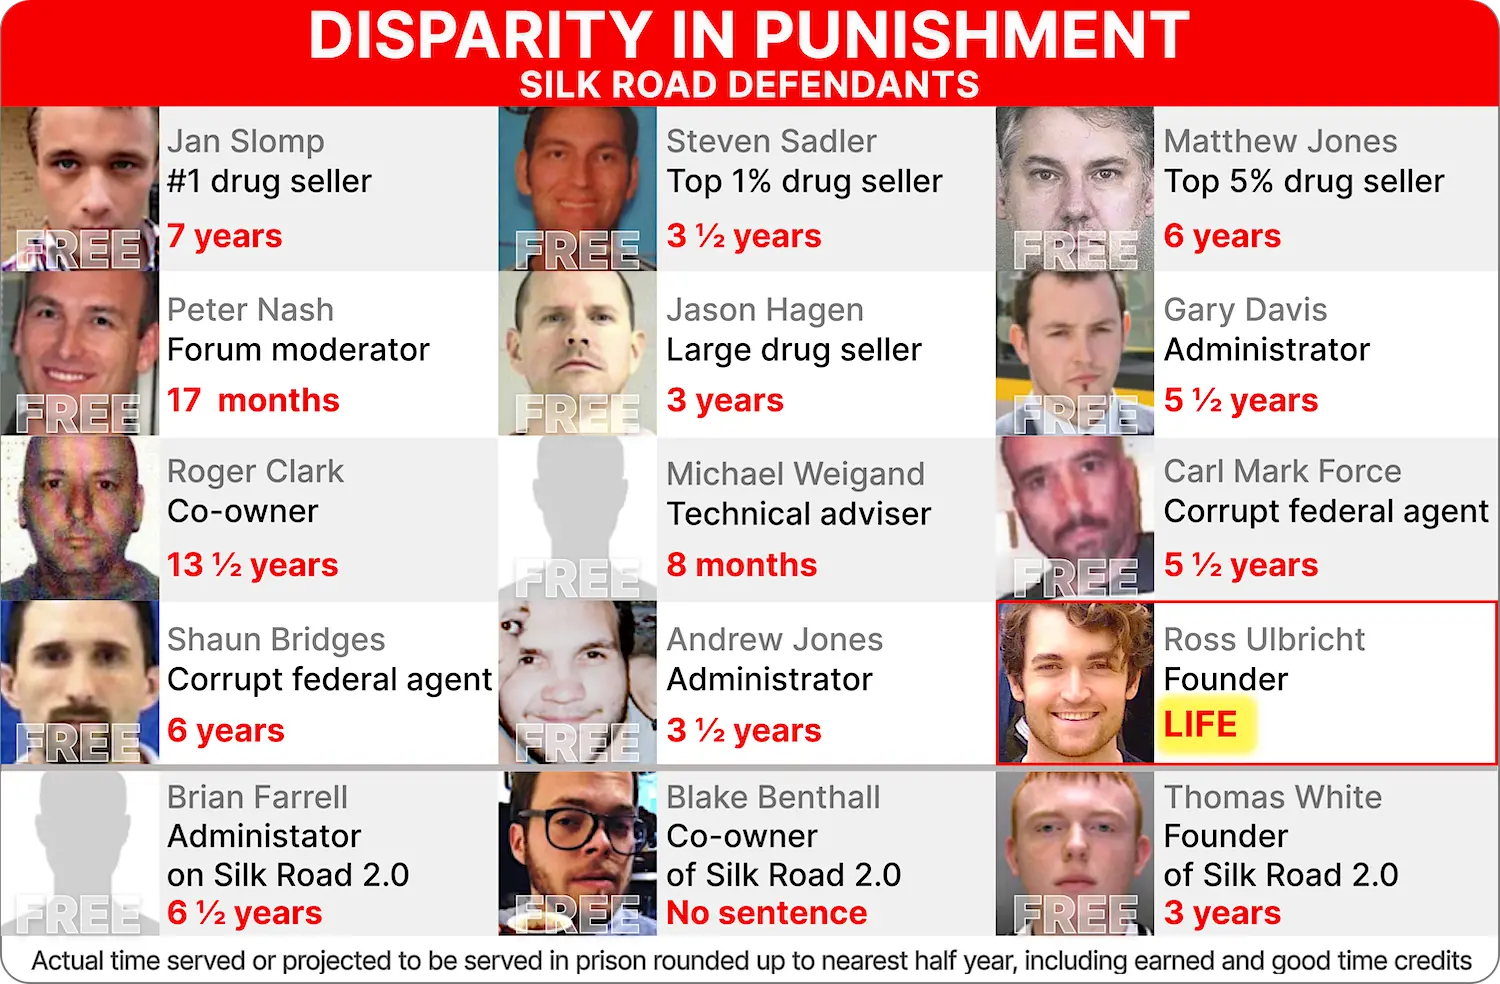 Chart showing disparity in punishment between Ross and all other Silk Road defendants